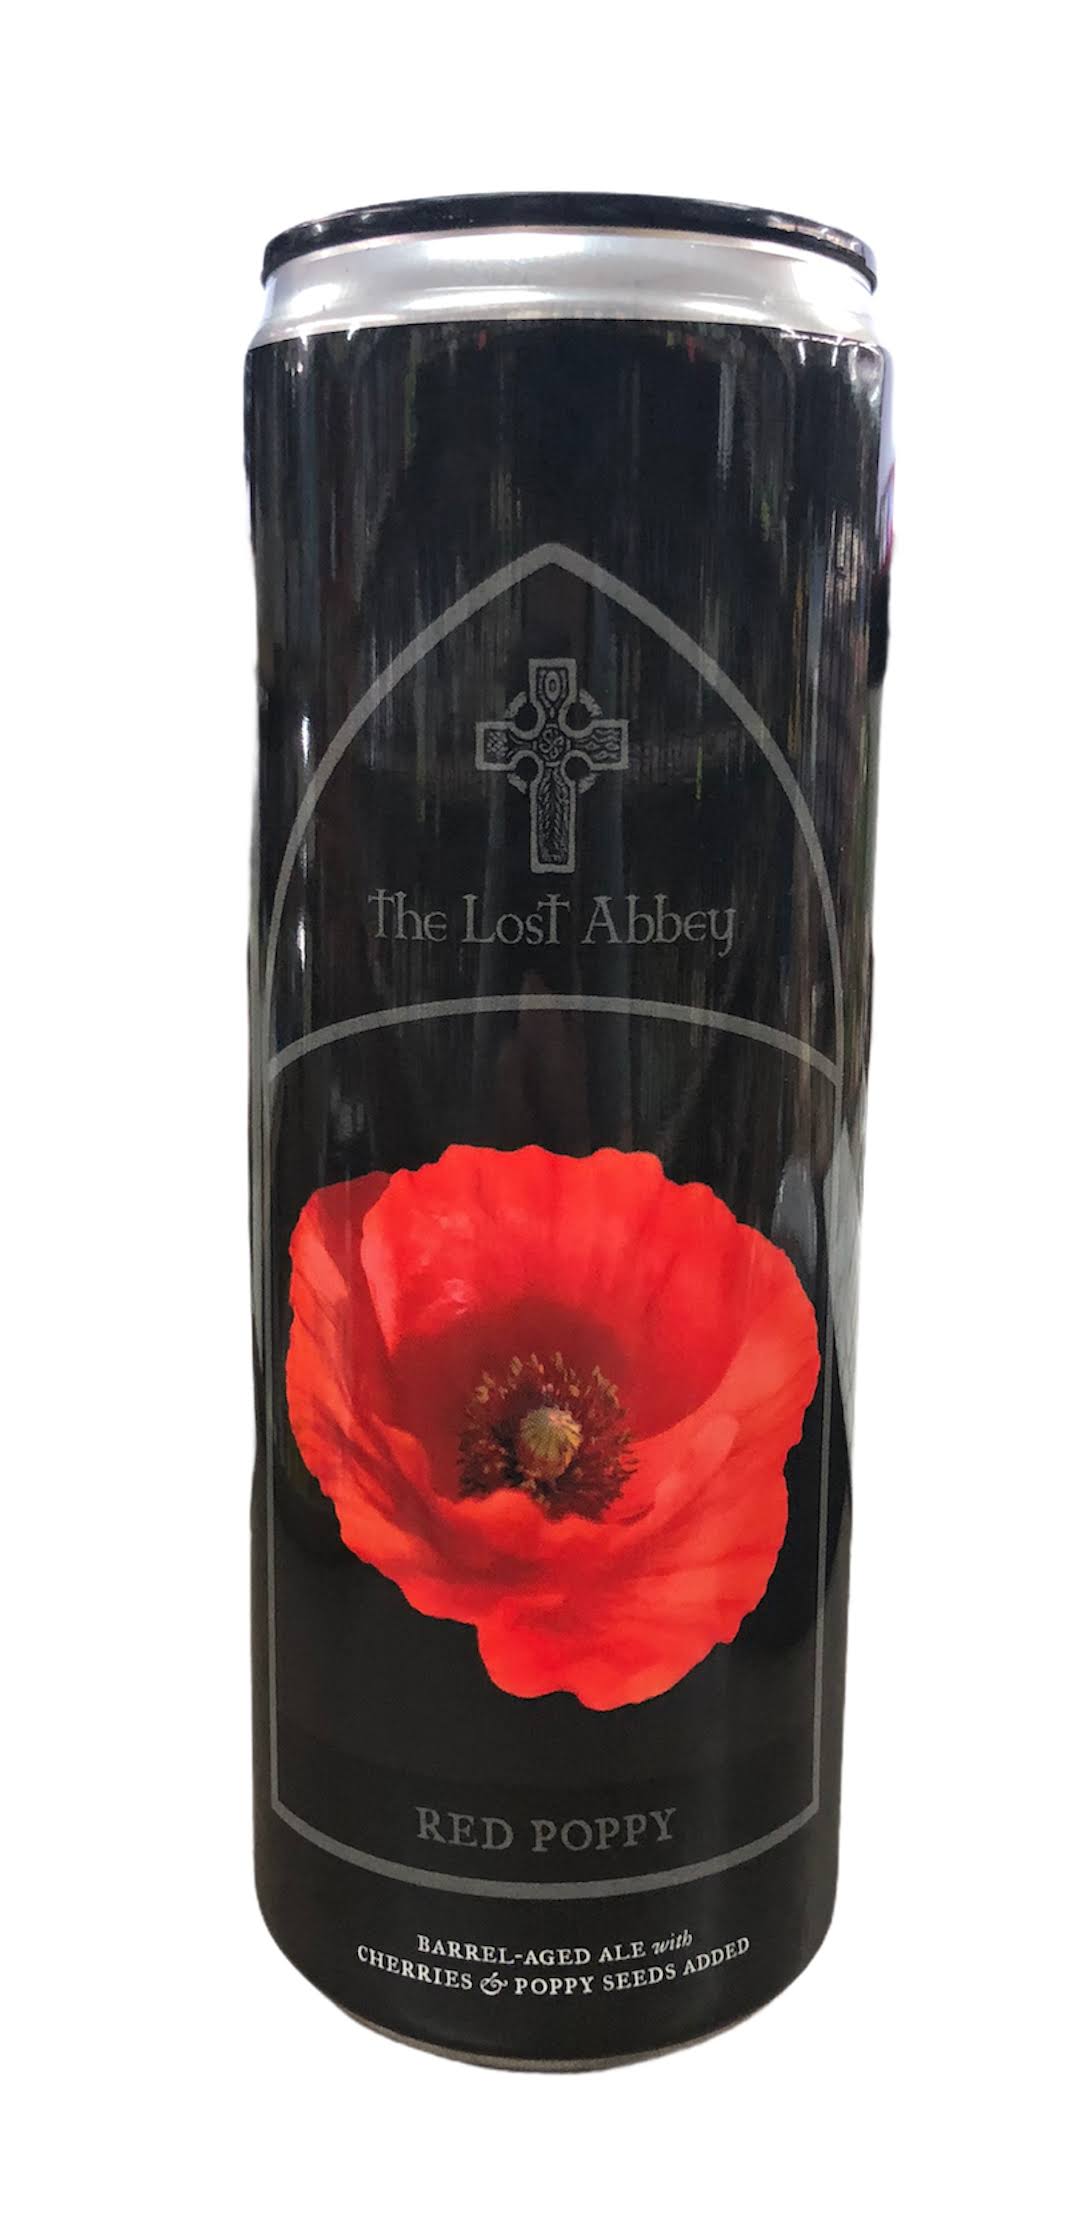 The Lost Abbey Red Poppy Ale